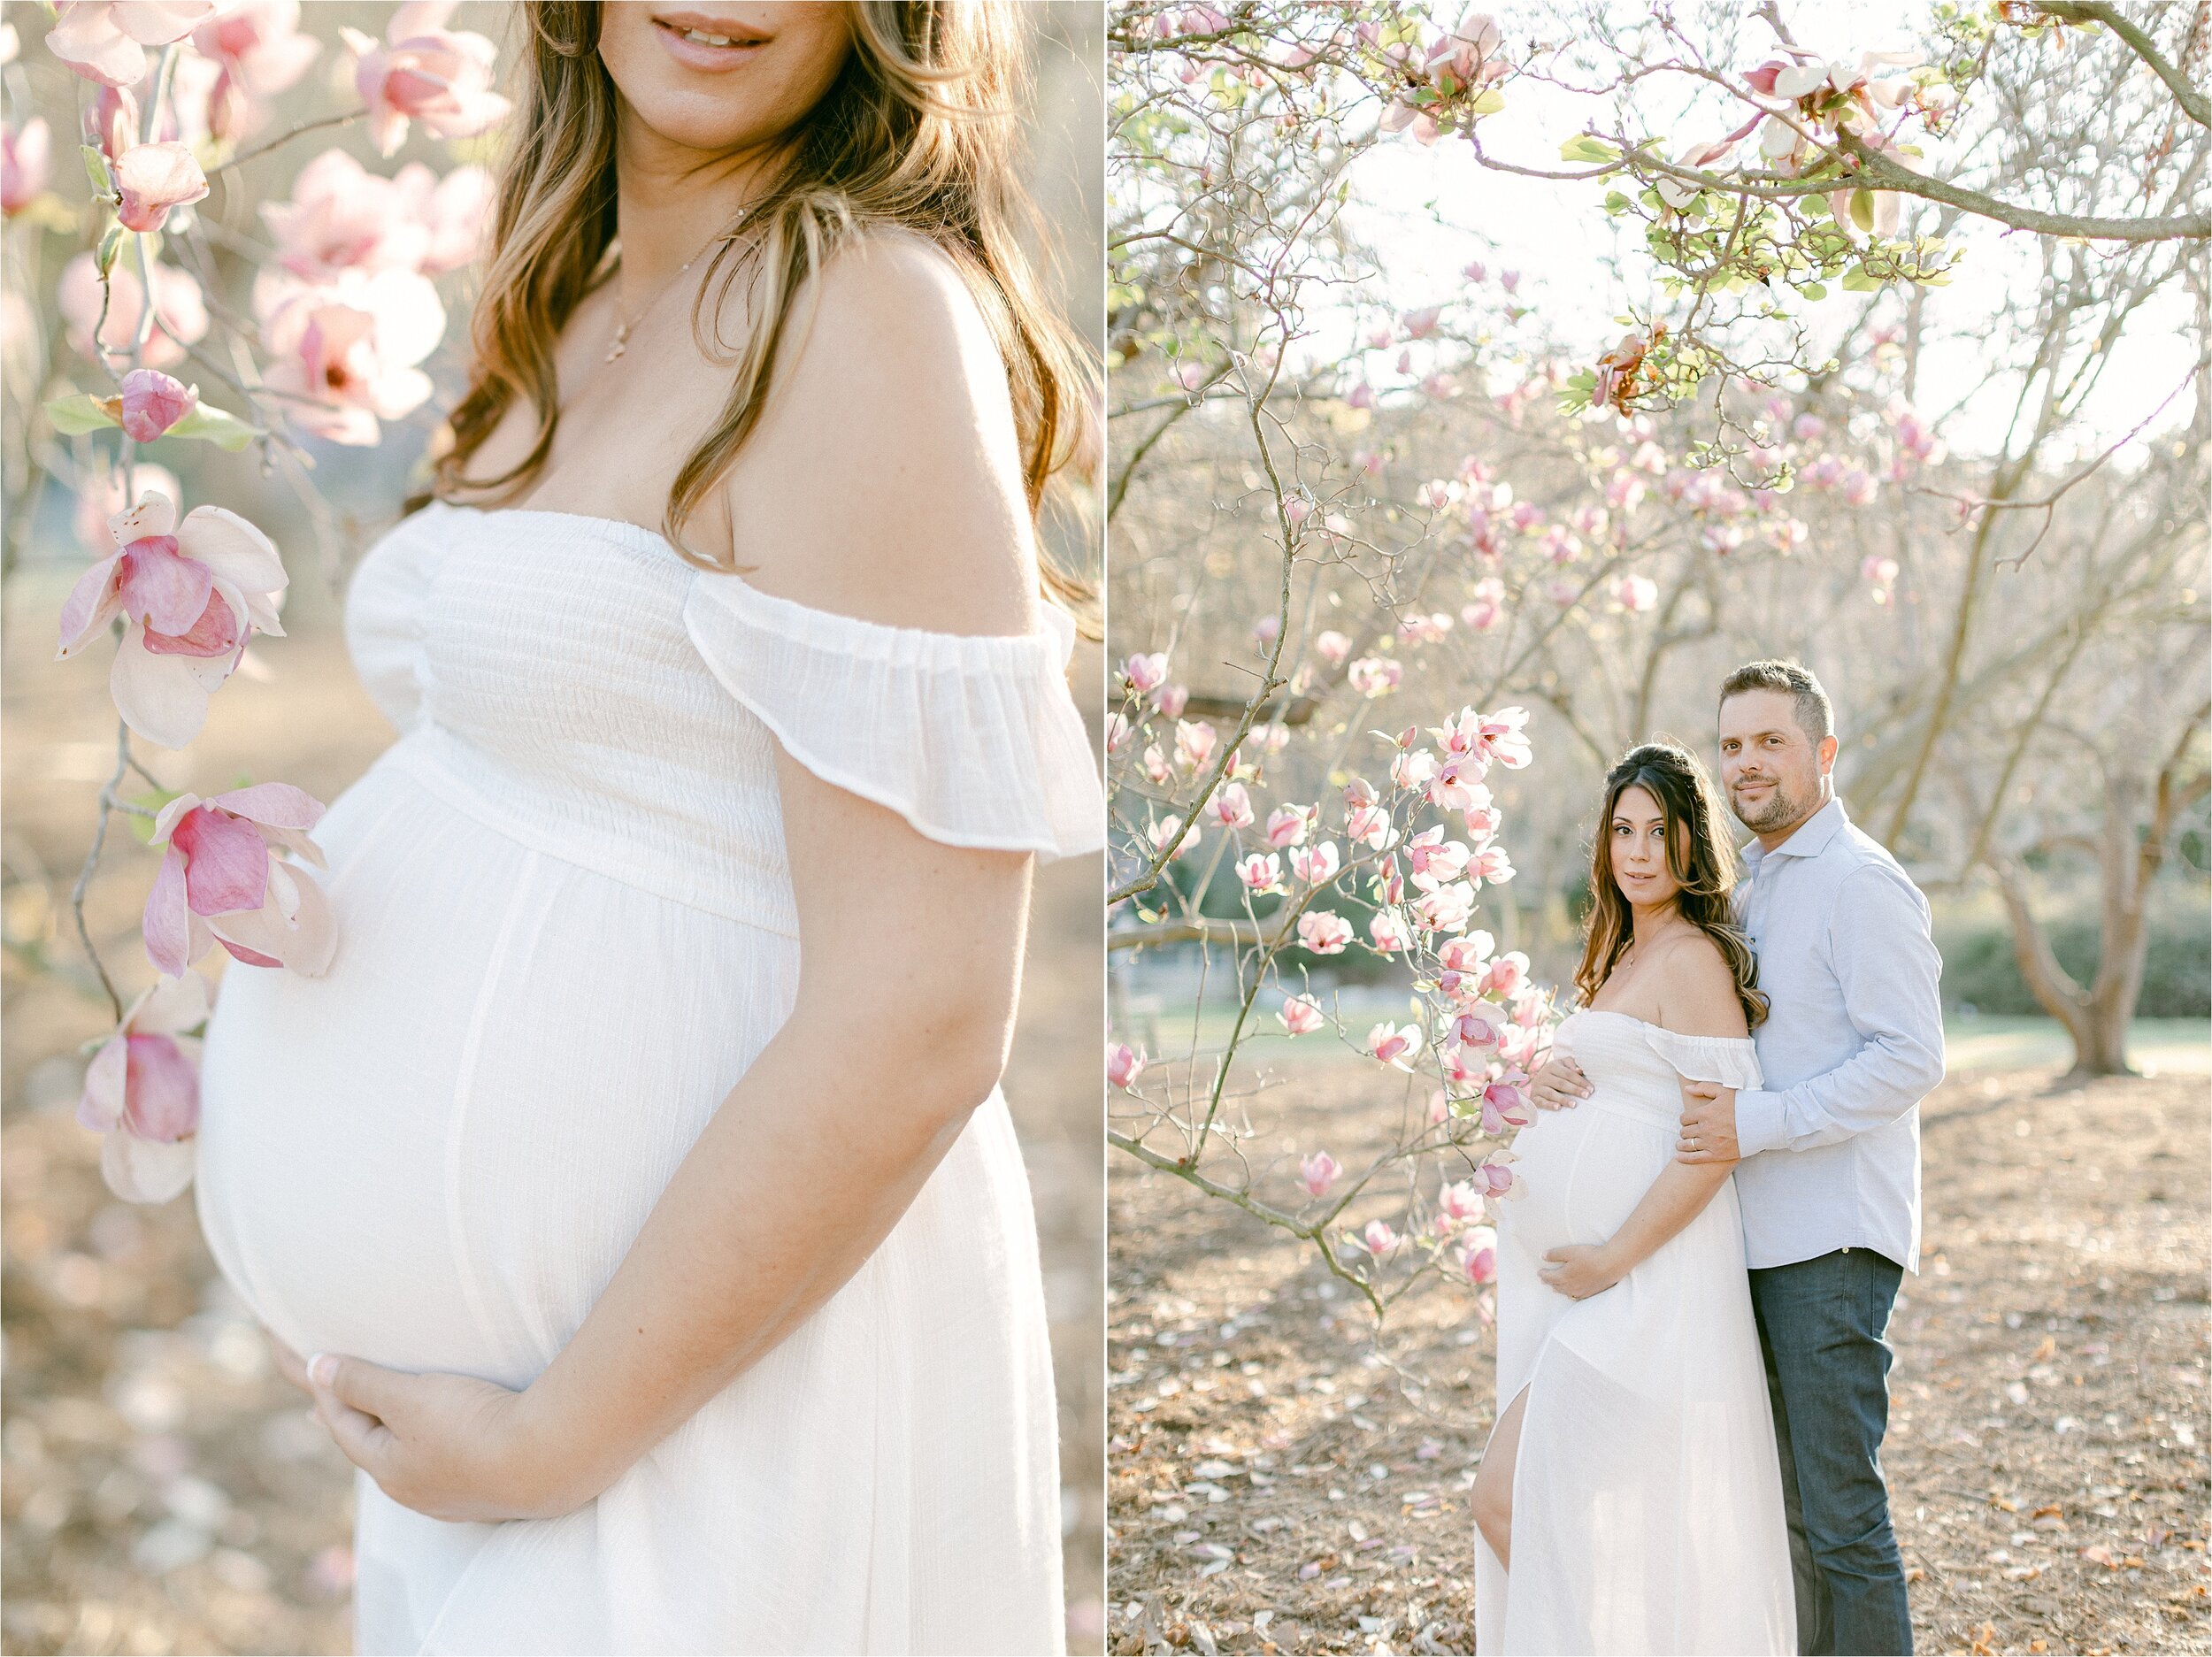 Expectant mother holds her belly as her husband embraces her while taking maternity photos.